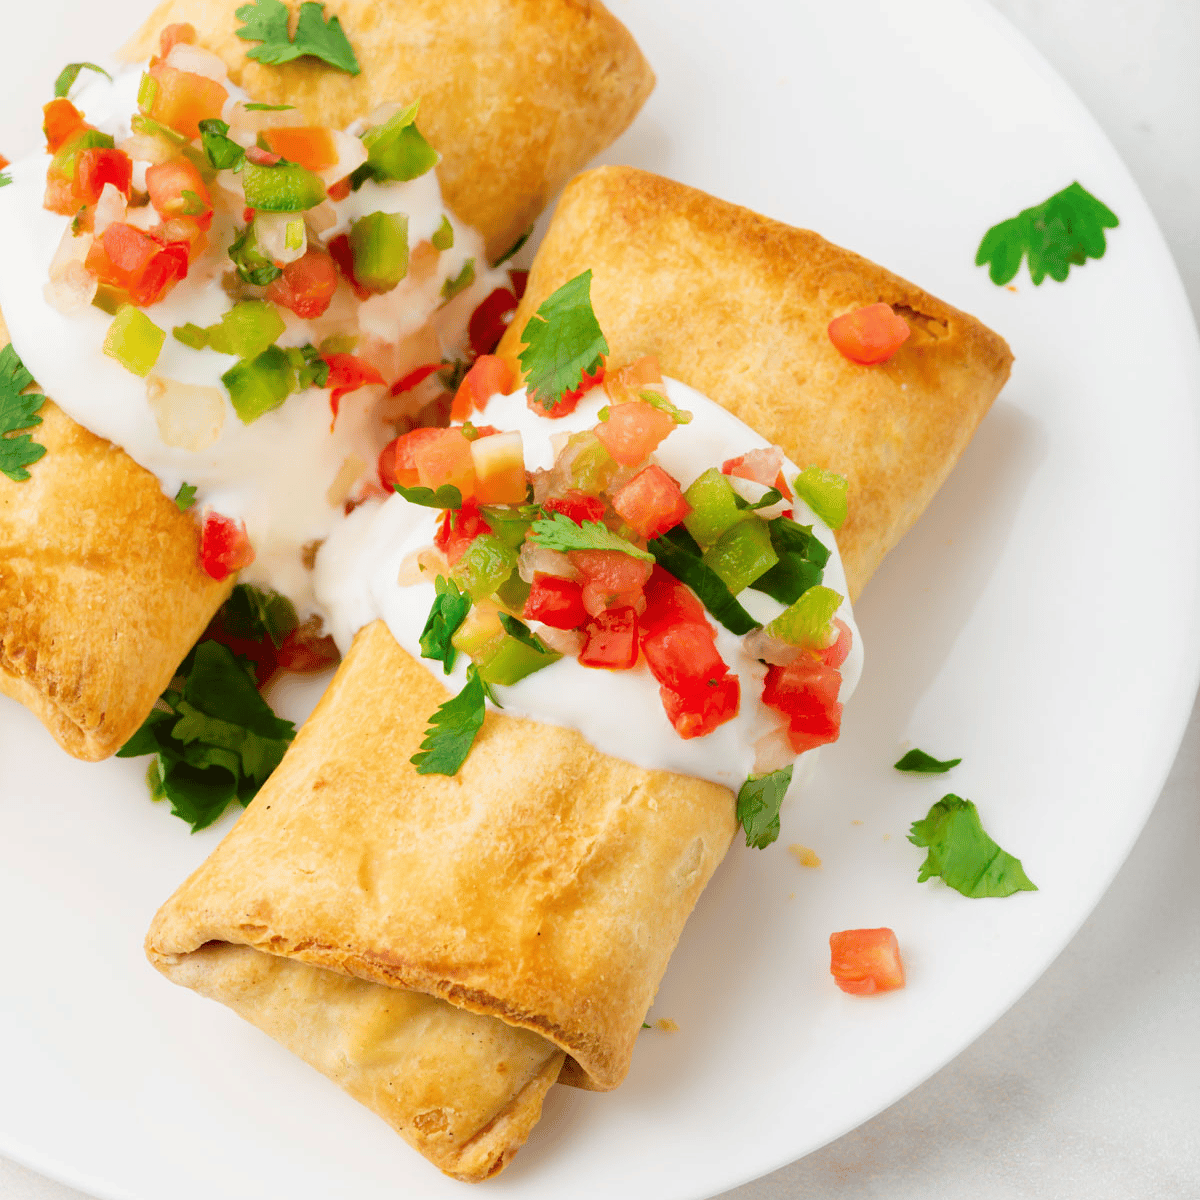 How to Make Chimichangas in an Air Fryer - Project Meal Plan